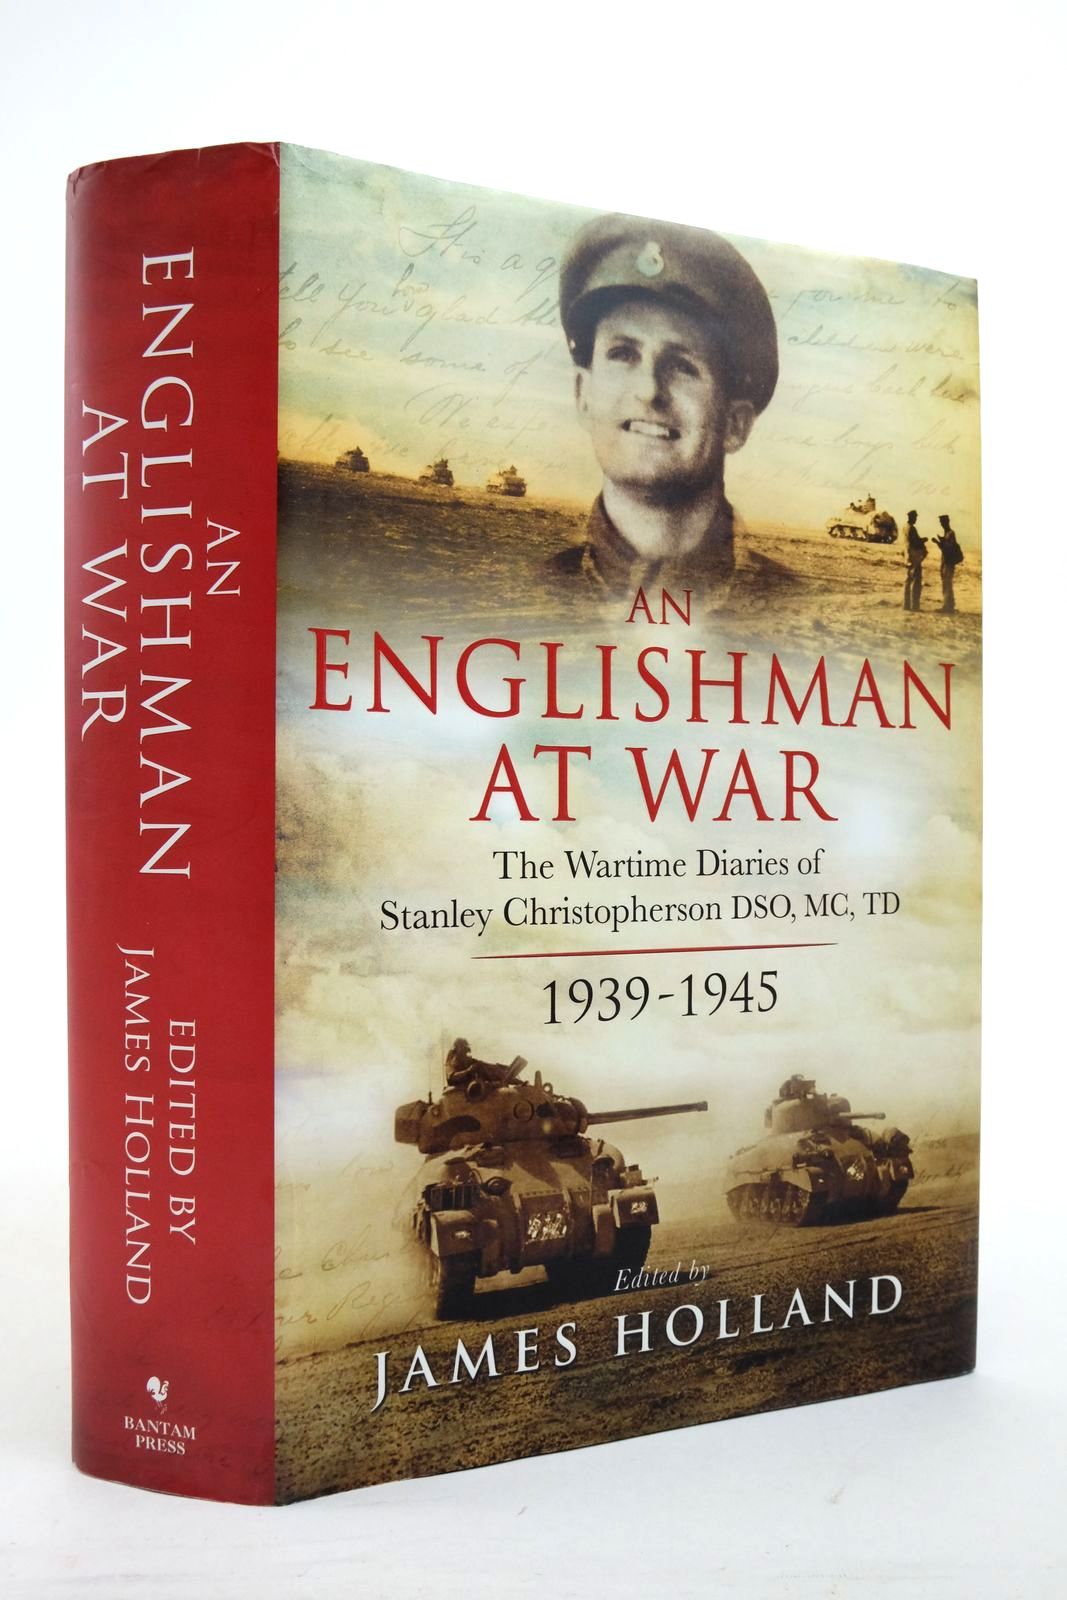 Photo of AN ENGLISHMAN AT WAR written by Holland, James
Christopherson, Stanley published by Bantam Press (STOCK CODE: 2138138)  for sale by Stella & Rose's Books